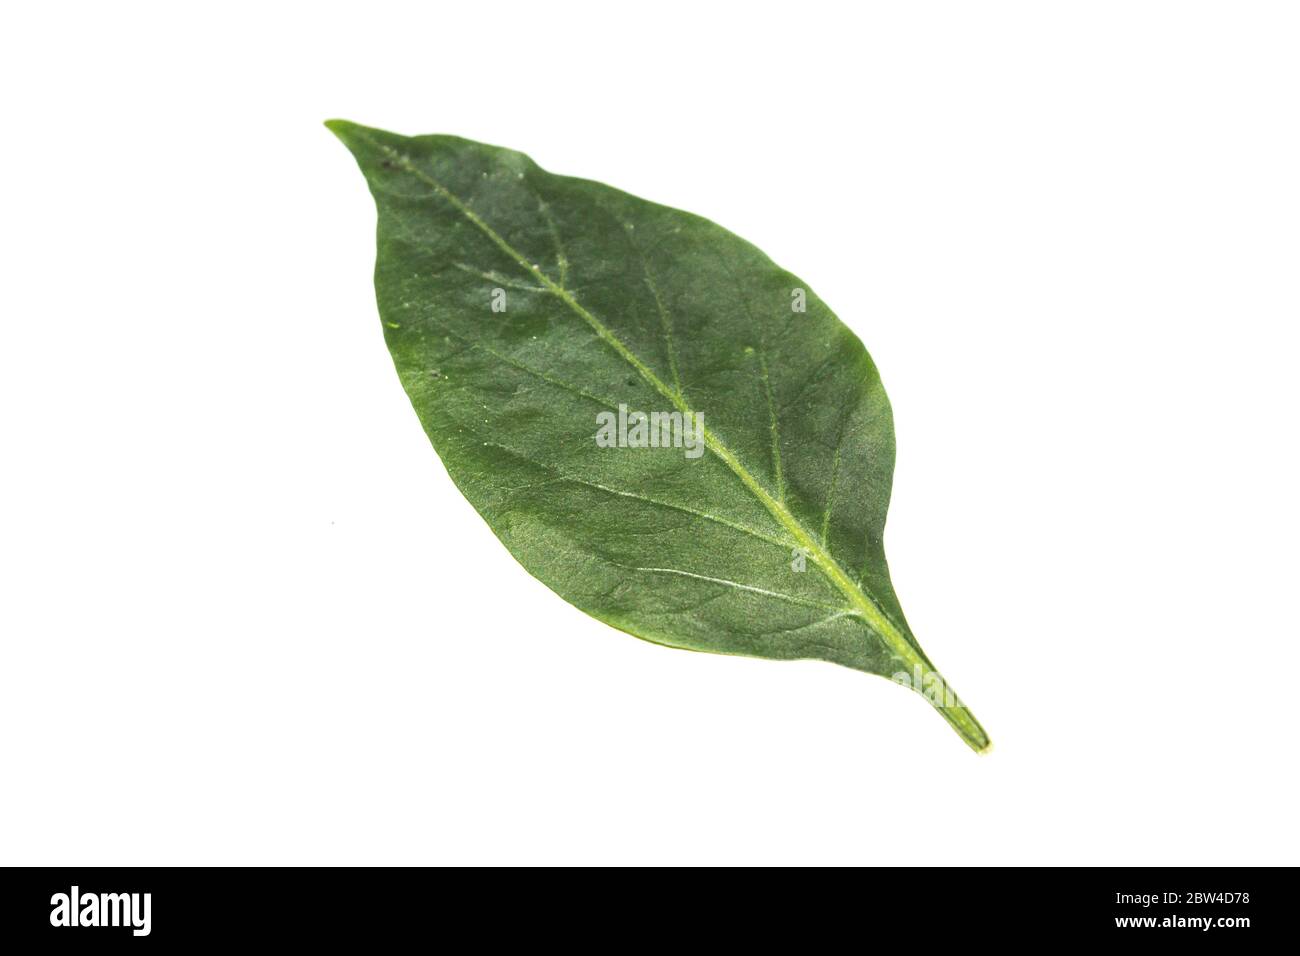 A picture of chili plant leafs Stock Photo